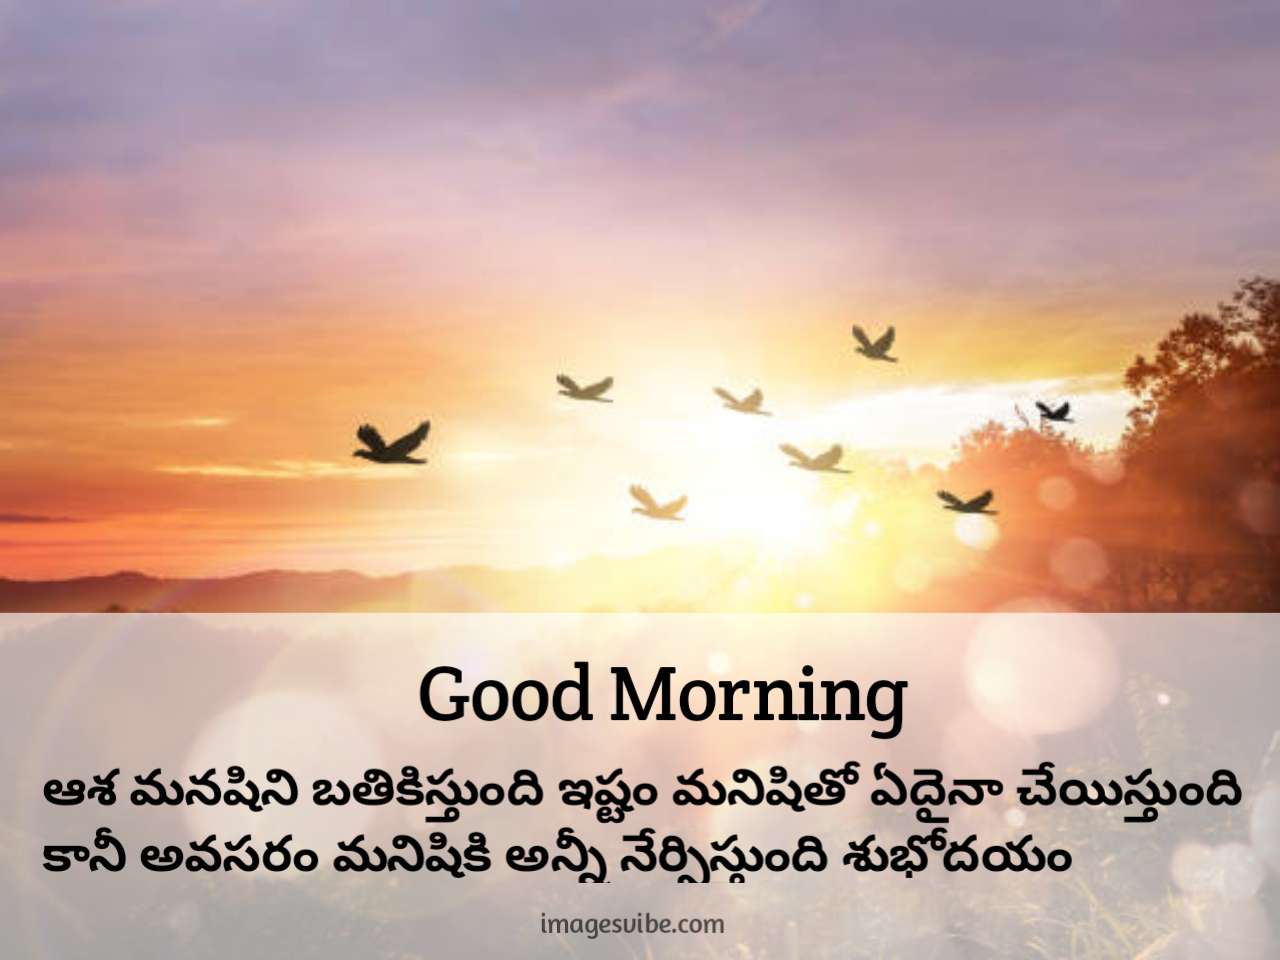 Extensive Collection of Over 999 Telugu Good Morning Images – Astonishing Full 4K Good Morning Images in Telugu